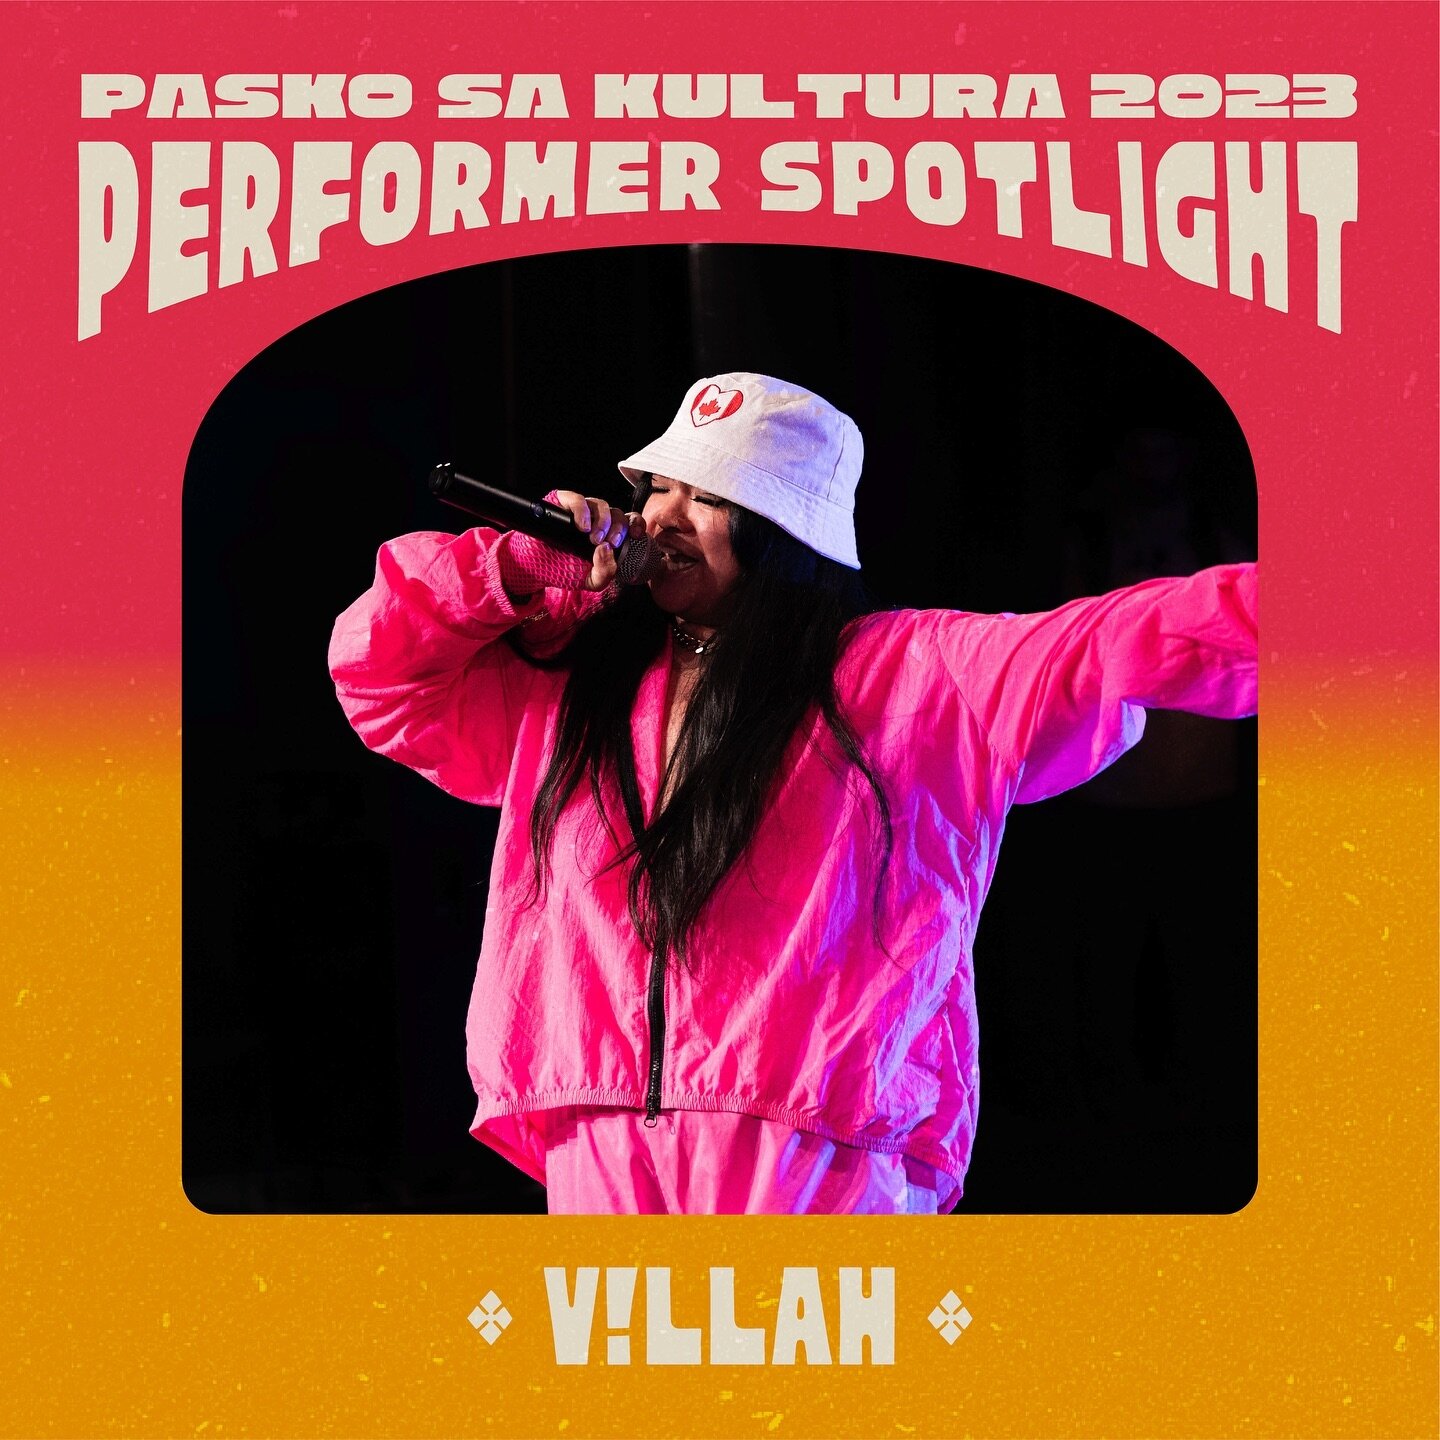 ✨ PRESENTING: V!LLAH ✨

@villahofficialmusic is the tiny but mighty Filipina rapper , who started taking music seriously in 2019 where she recorded just off her Iphone and a Youtube beat and has been building a fanbase ever since. 2022 she started ta